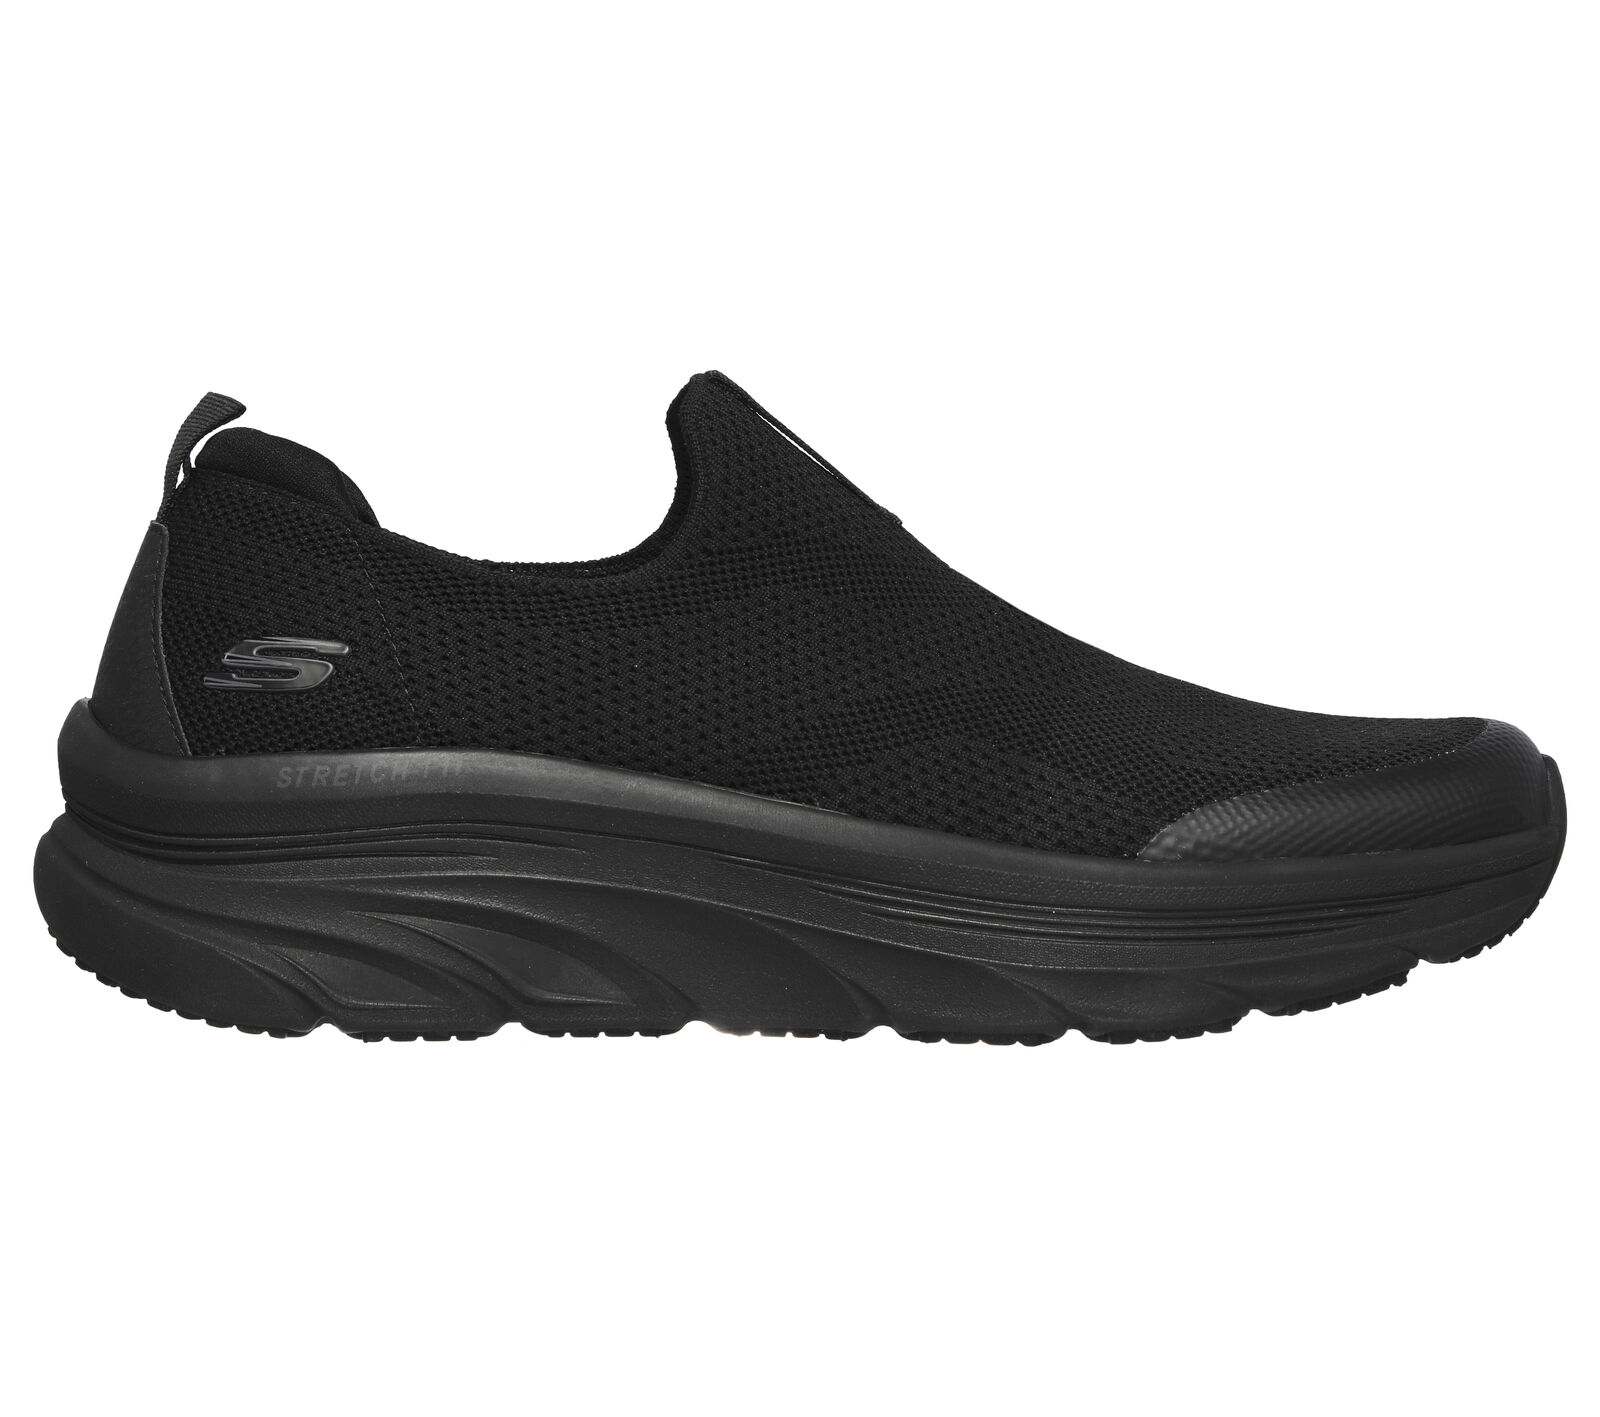 Shop the Relaxed Fit: D'Lux Walker - Quick Upgrade | SKECHERS